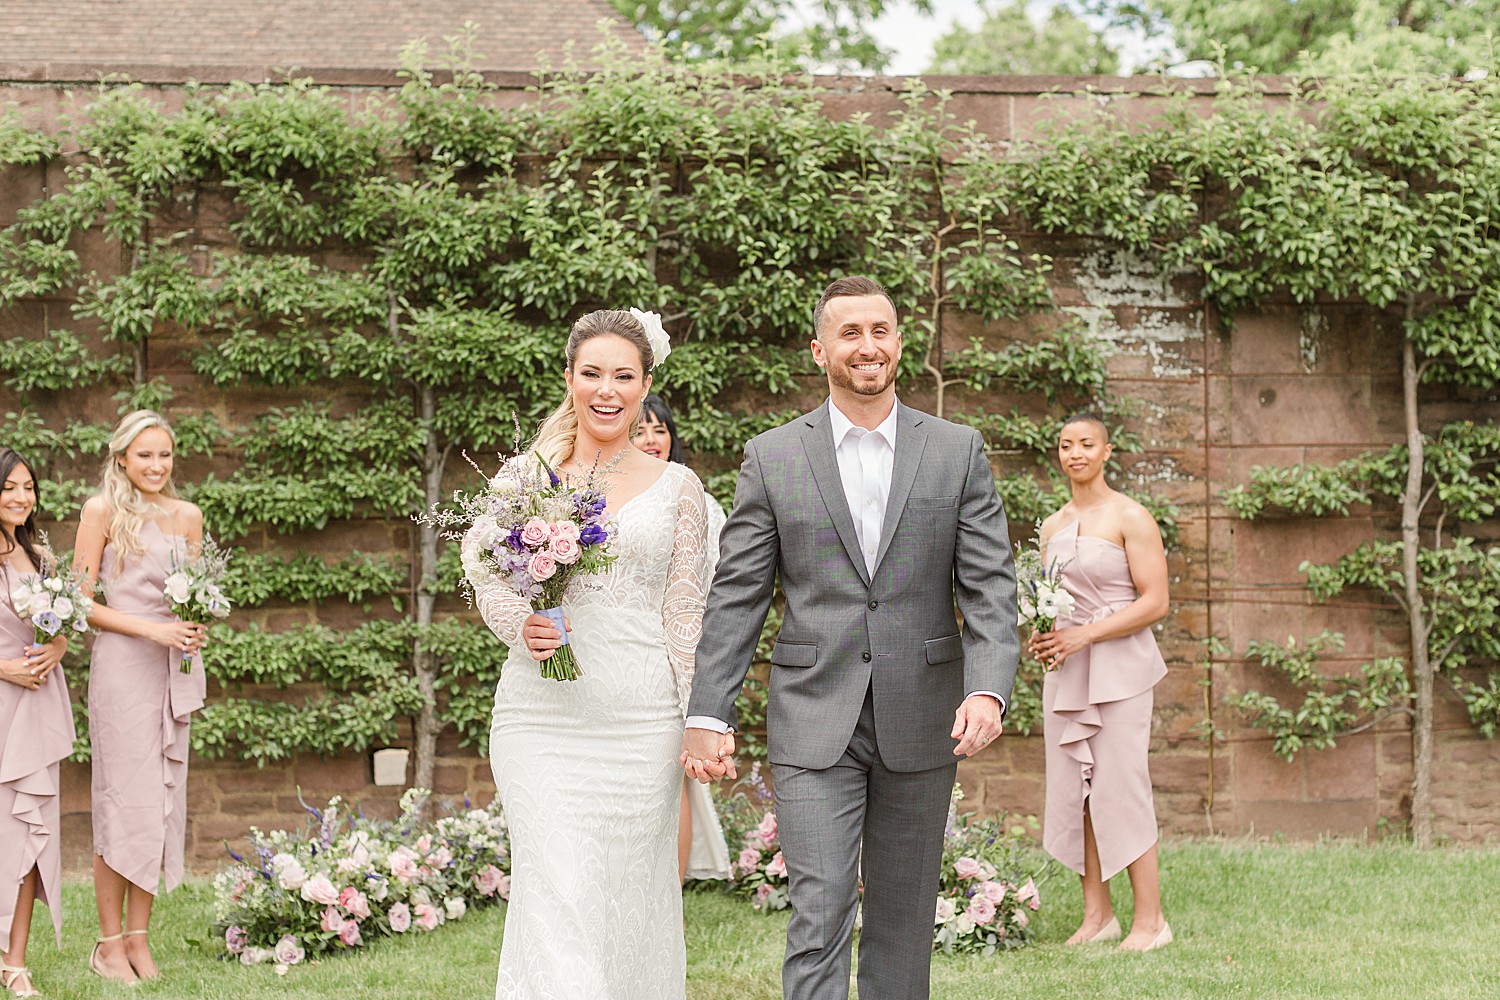 newlyweds hold hands and walk back down the aisle together